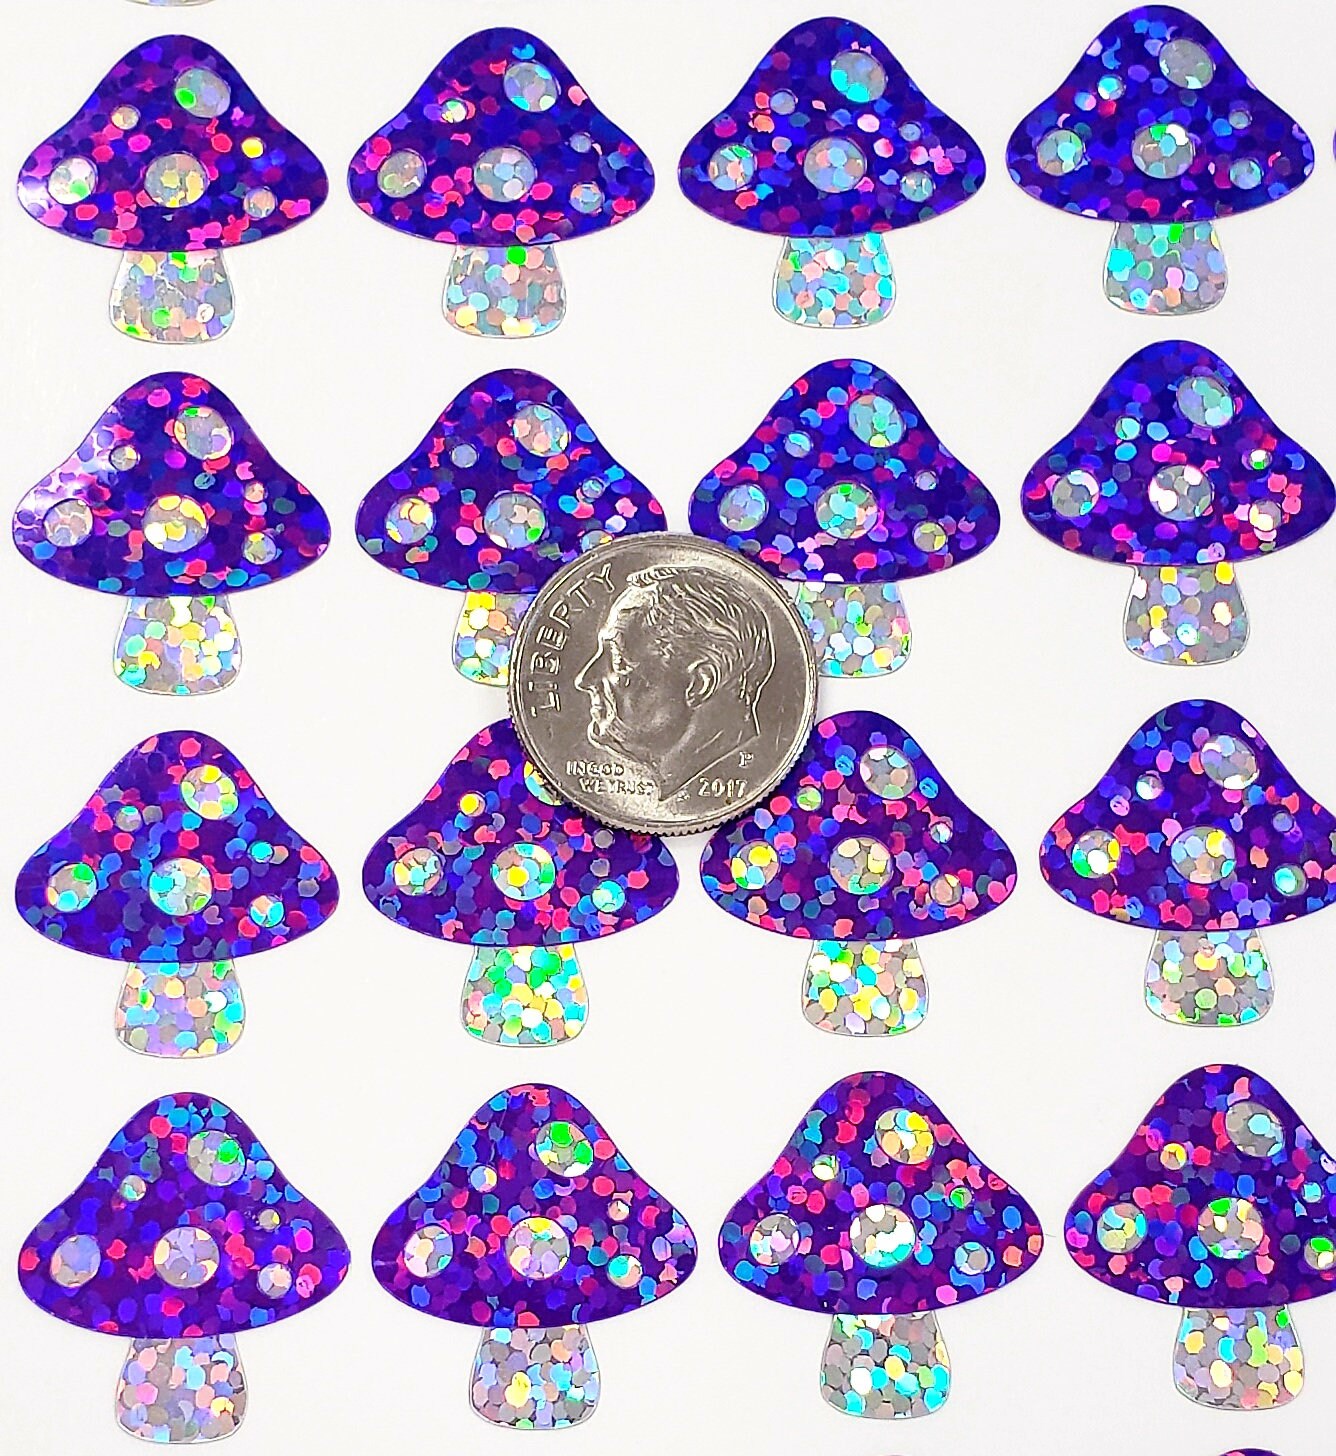 Purple Mushroom Stickers, set of 48 small sparkly mushroom decals for notebooks, journals, envelopes. Cottagecore decor for fairy houses.